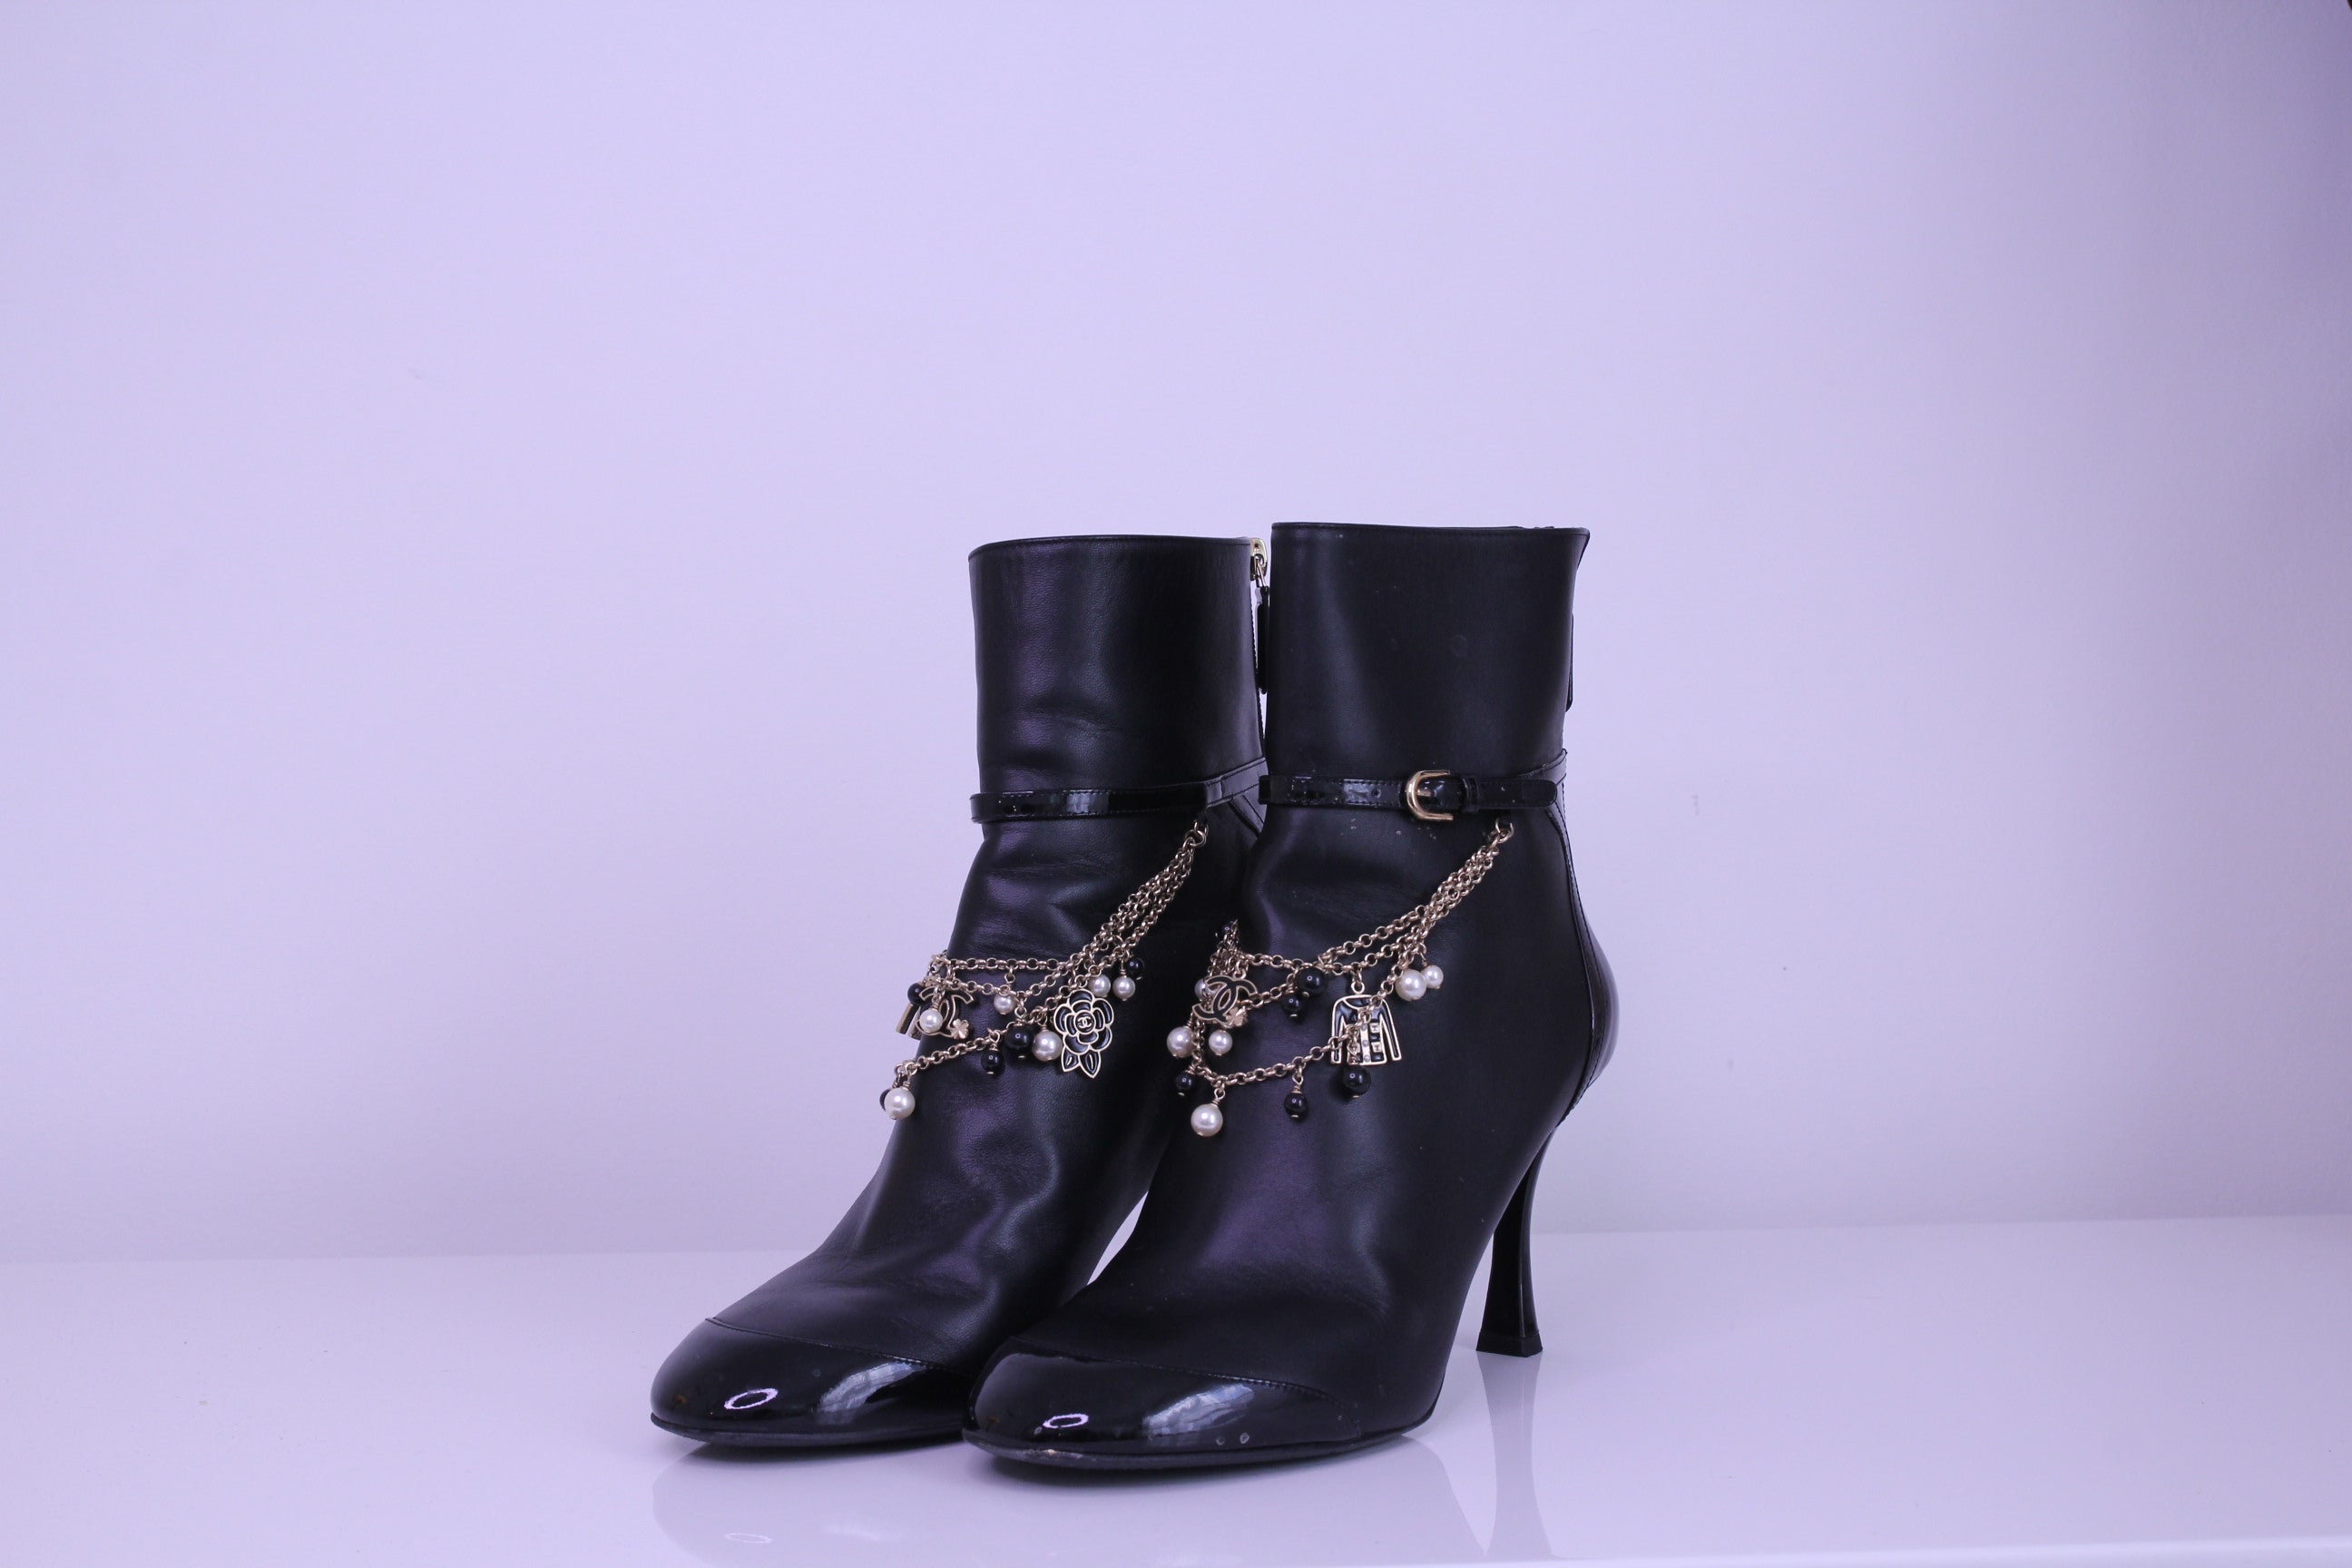 CHANEL Black Charm Heel Boots Patent and Leather Sz 40C